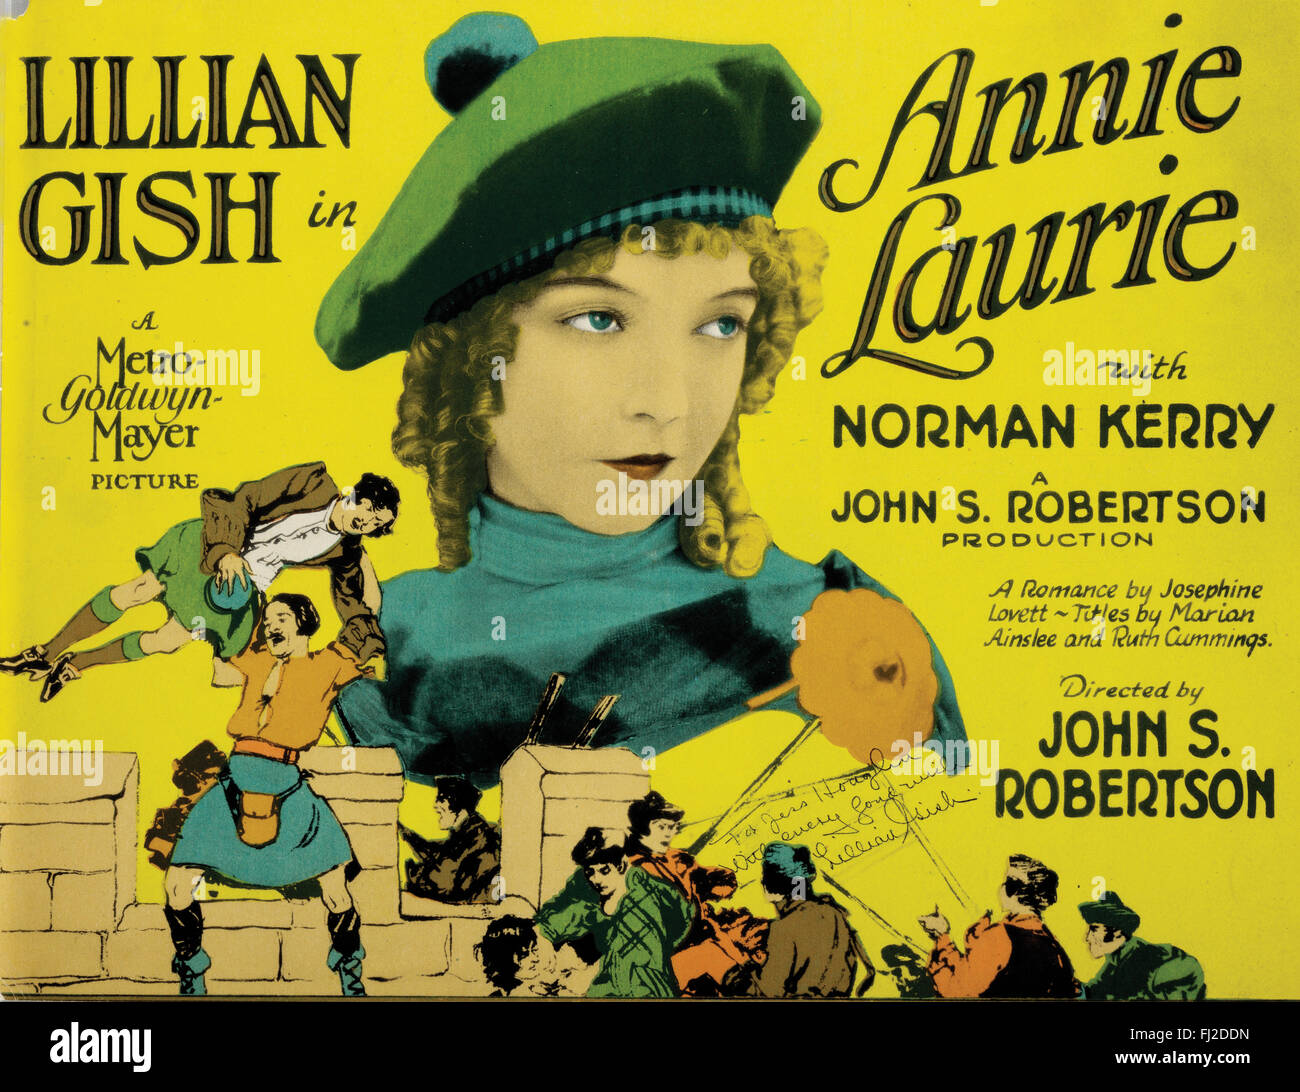 'Annie Laurie', (MGM, 1927), title lobby card. Starring: Lillian Gish, Norman Kerry, Creighton Hale, Joseph Striker, and Hobart Bosworth. Director: John S. Robertson. Stock Photo